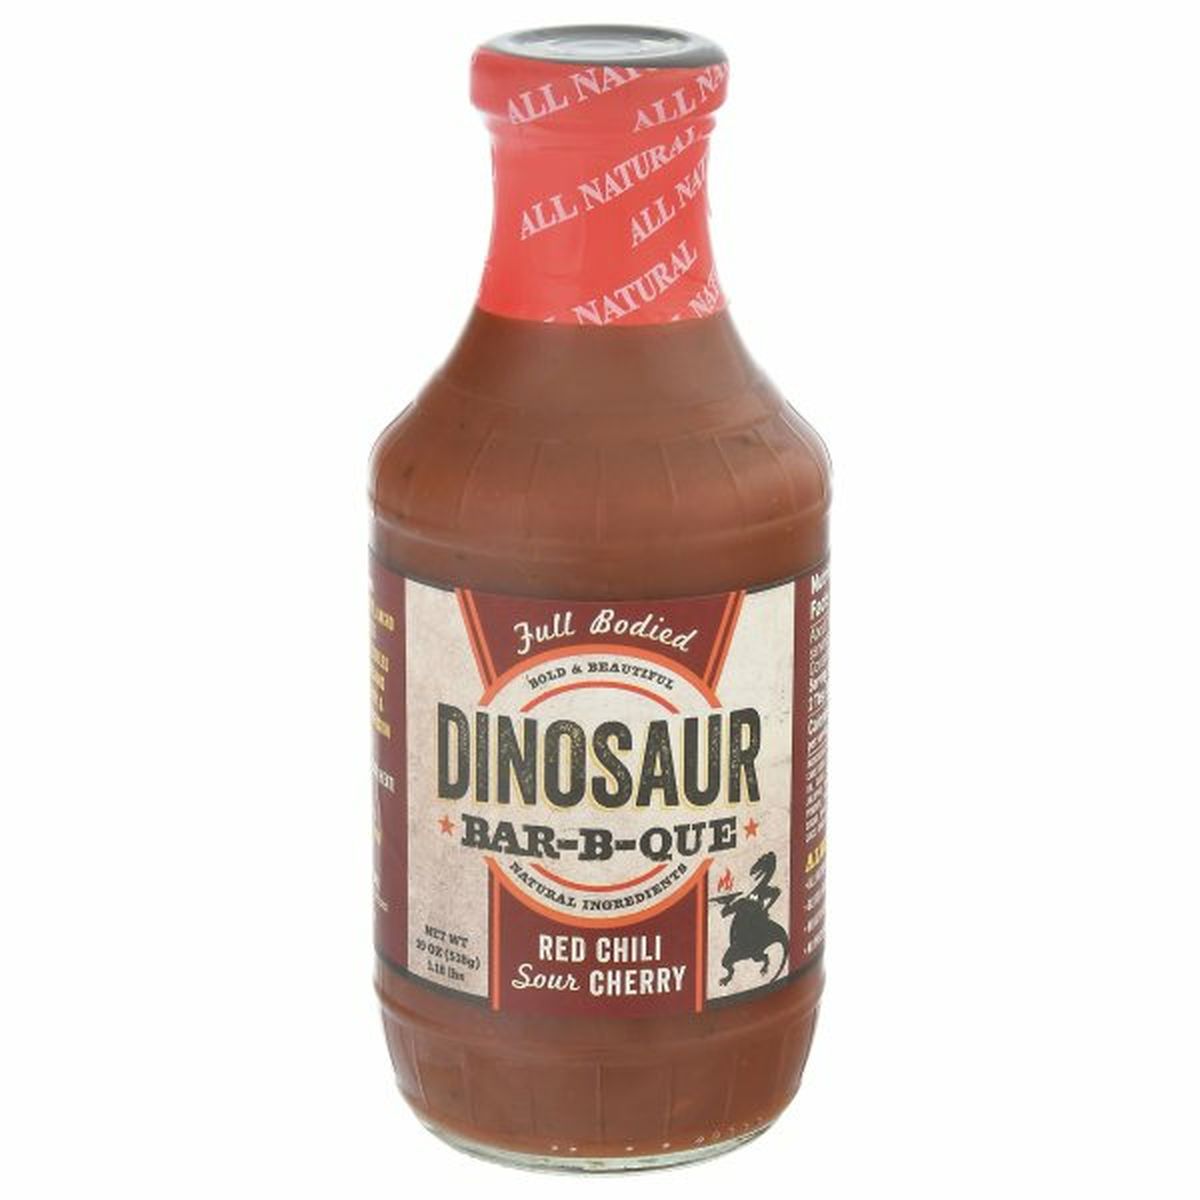 Calories in Dinosaur Bar-B-Que Sauce, Red Chili Sour Cherry